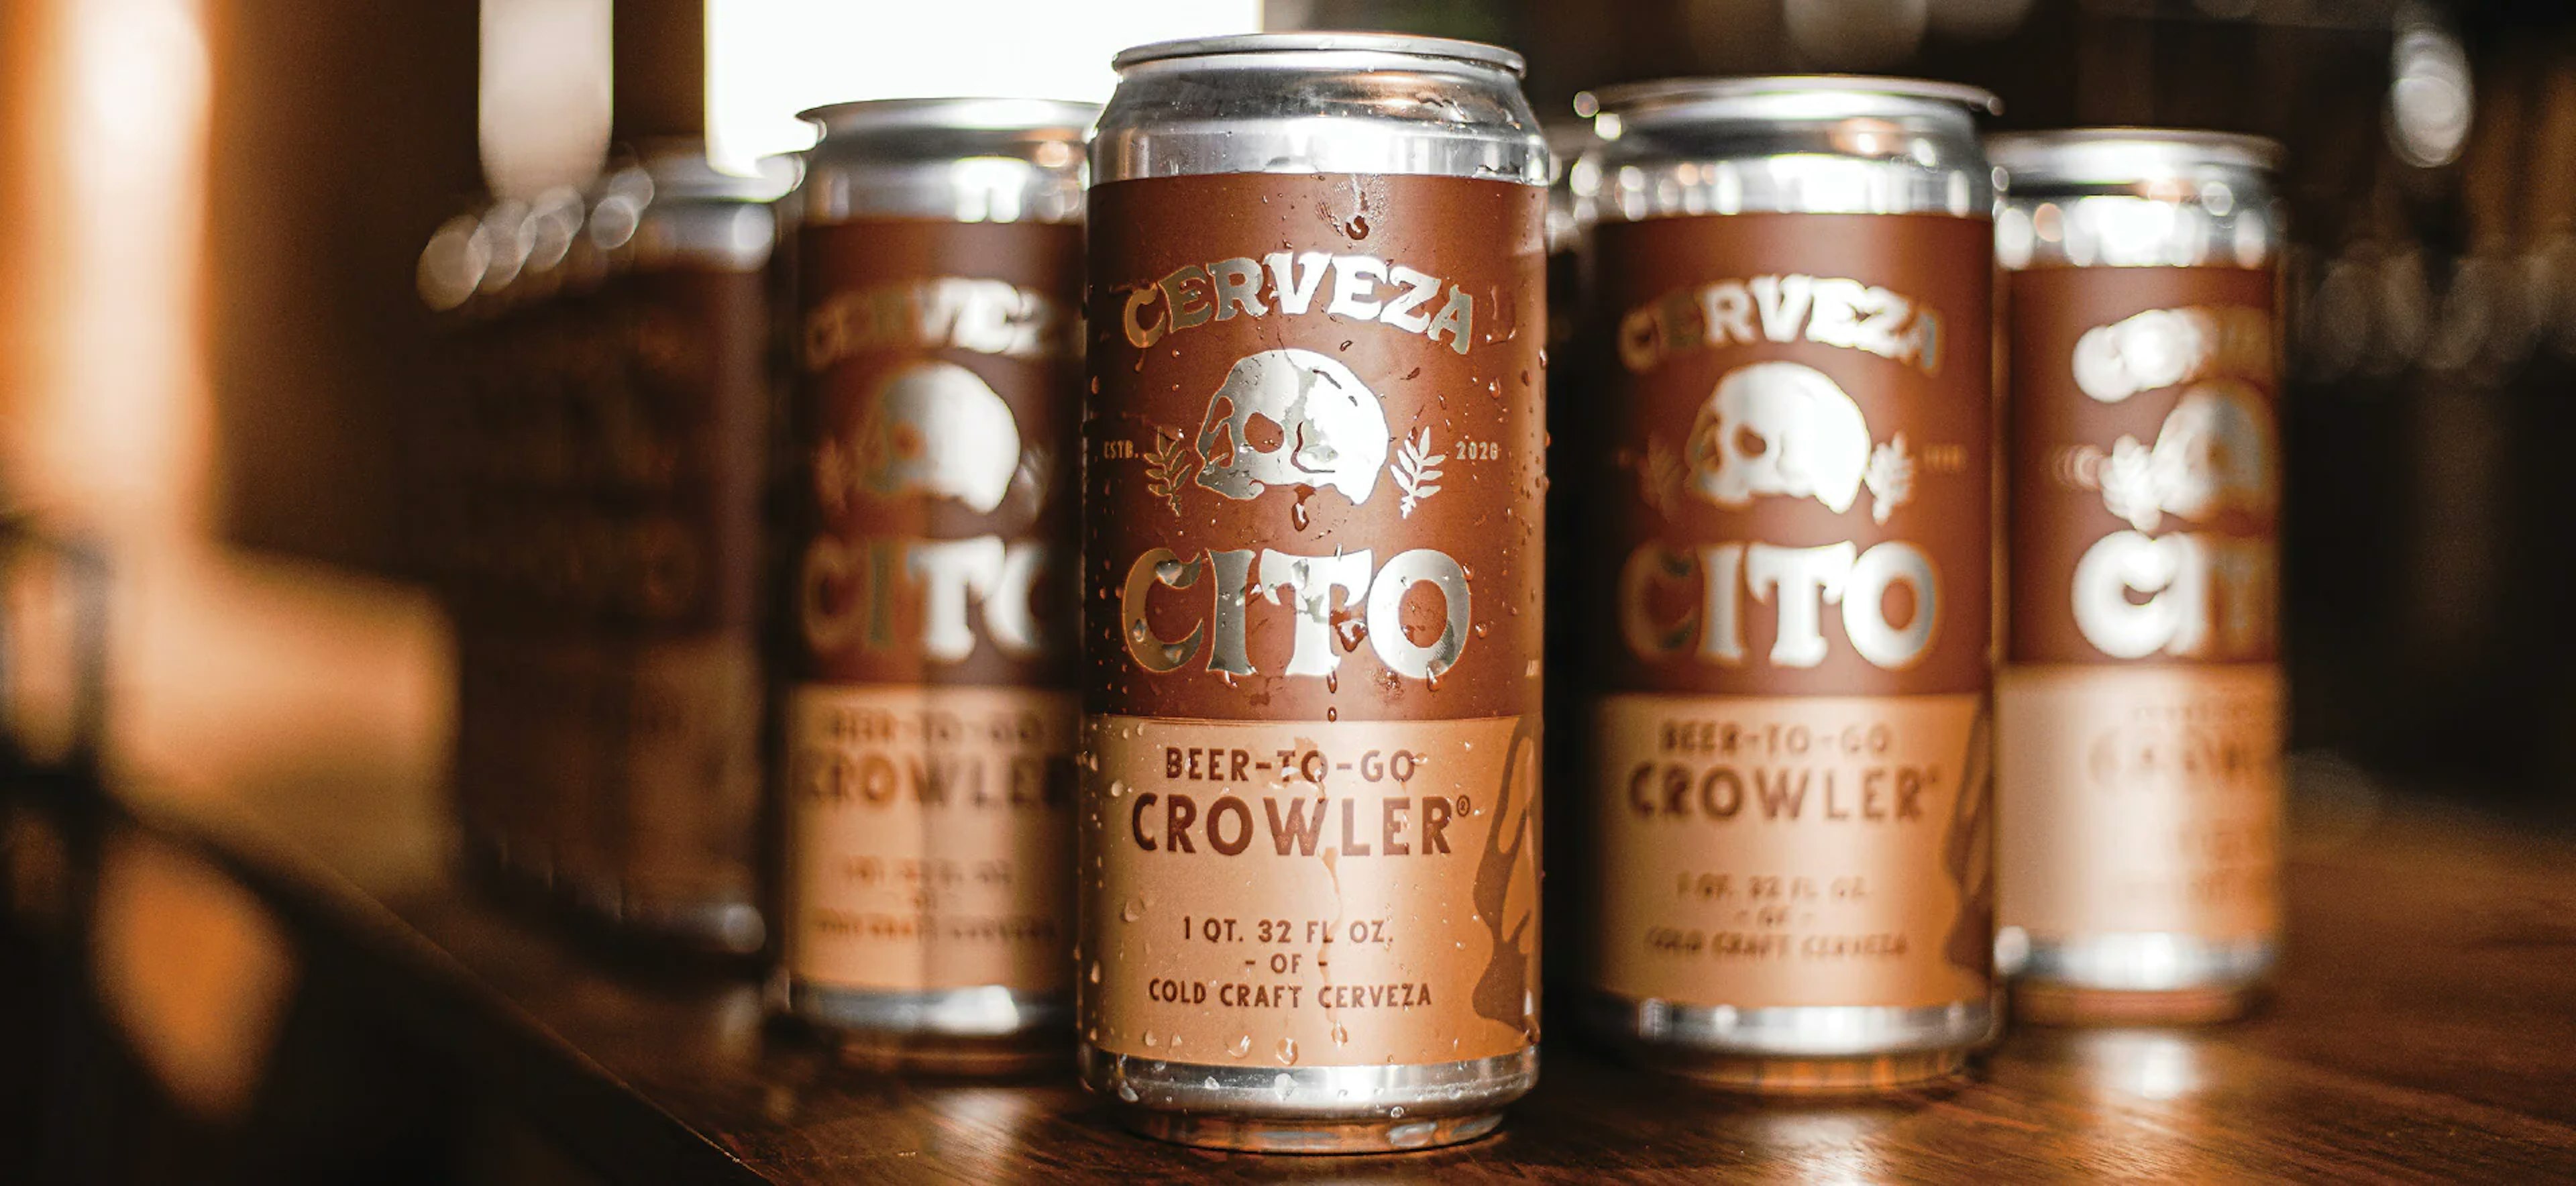 Cerveza Cito Crowlers on a table.